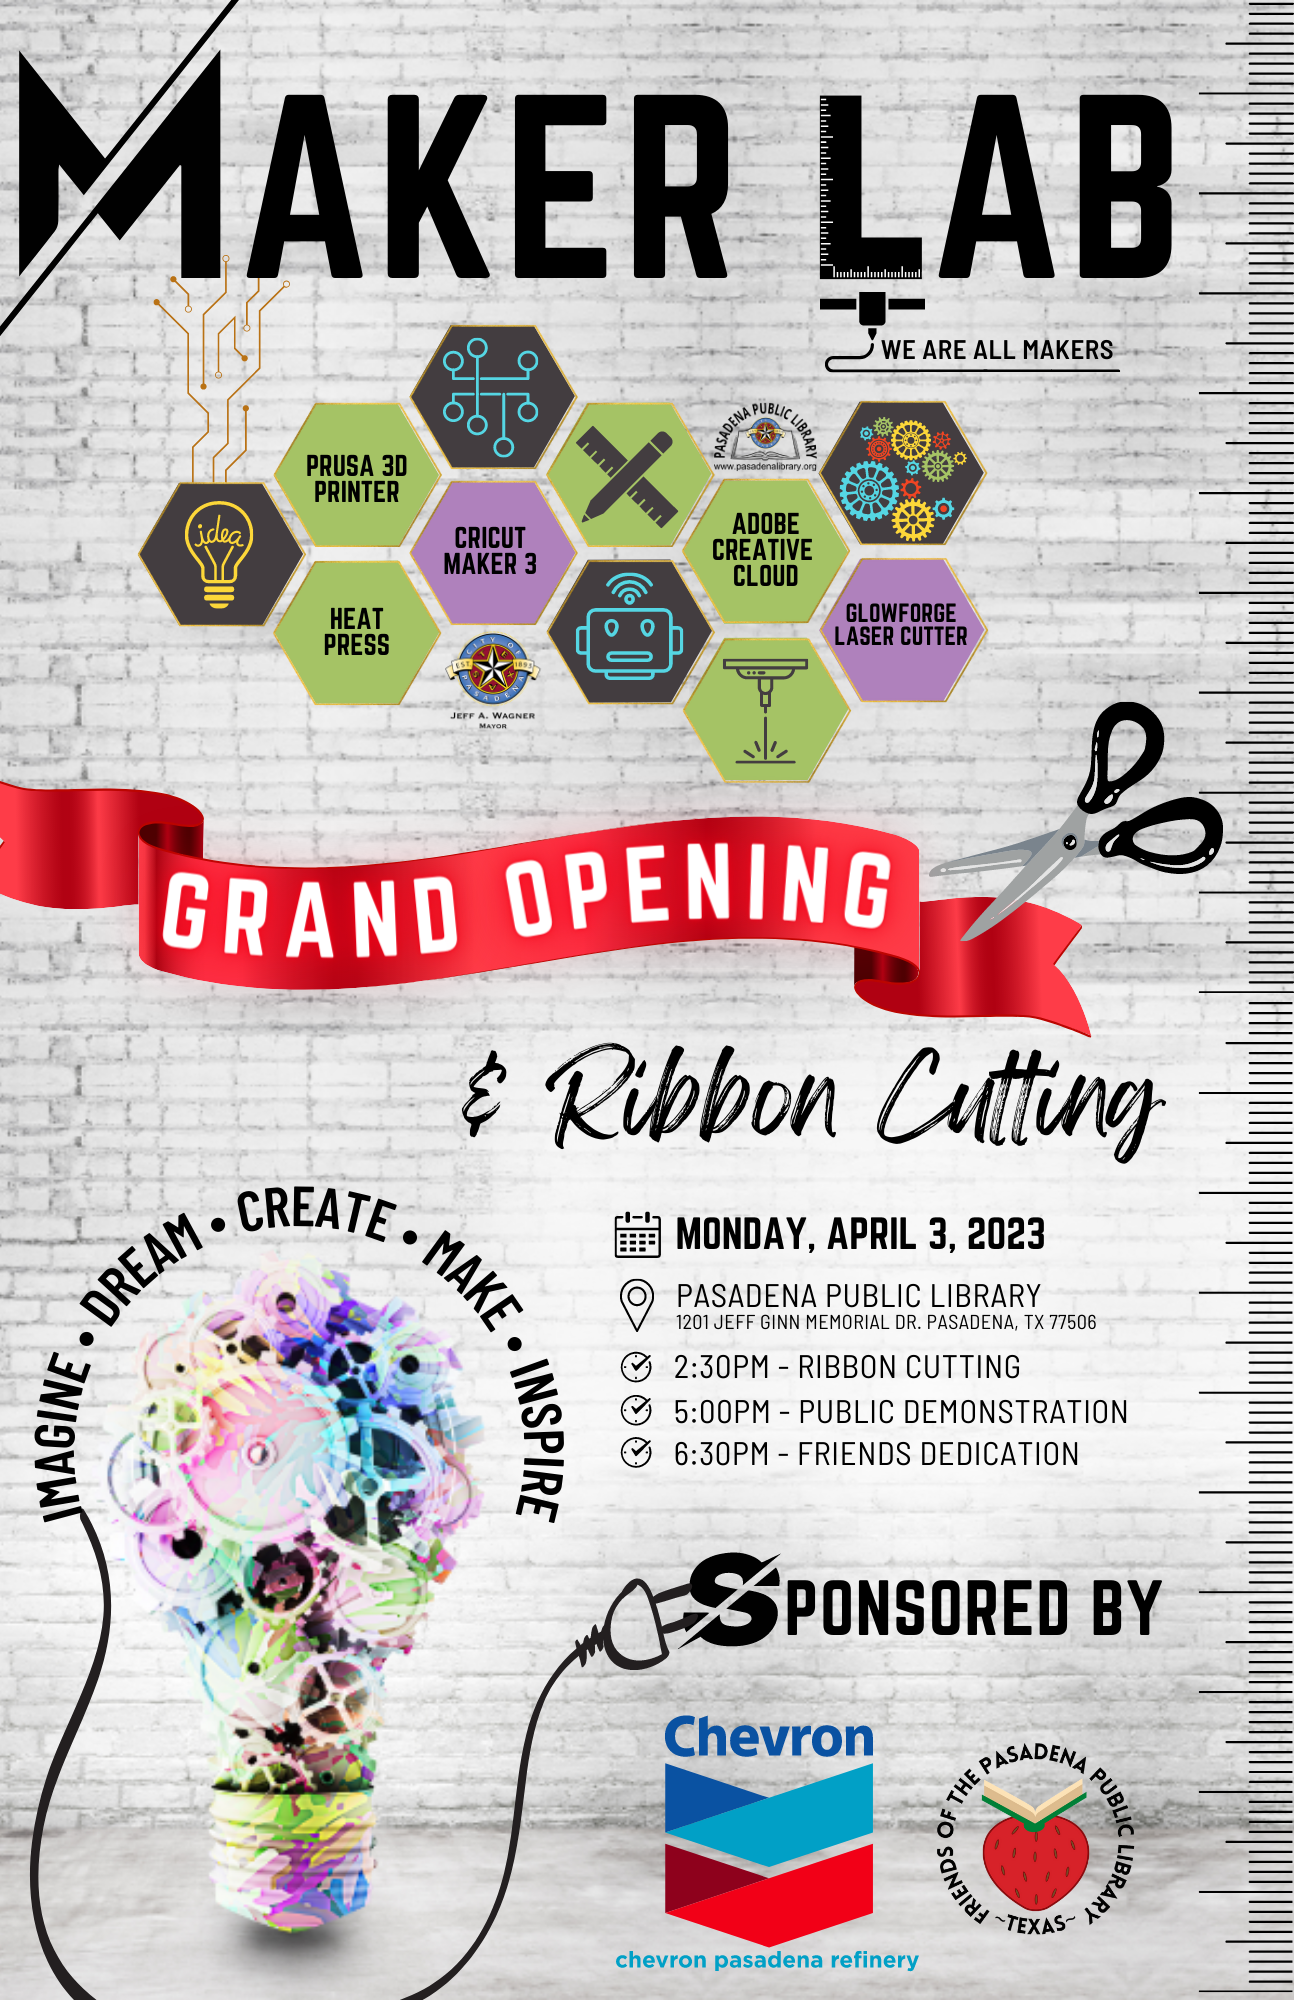 Join us for the Grand Opening of Pasadena Public Library's Makerspace, sponsored by Chevron and the Friends of the Library!  The Maker Lab will include Prusa 3D Printers, a Glowforge Laser Cutter, Cricut Maker 3, Heat Press, and Adobe Creative Cloud.